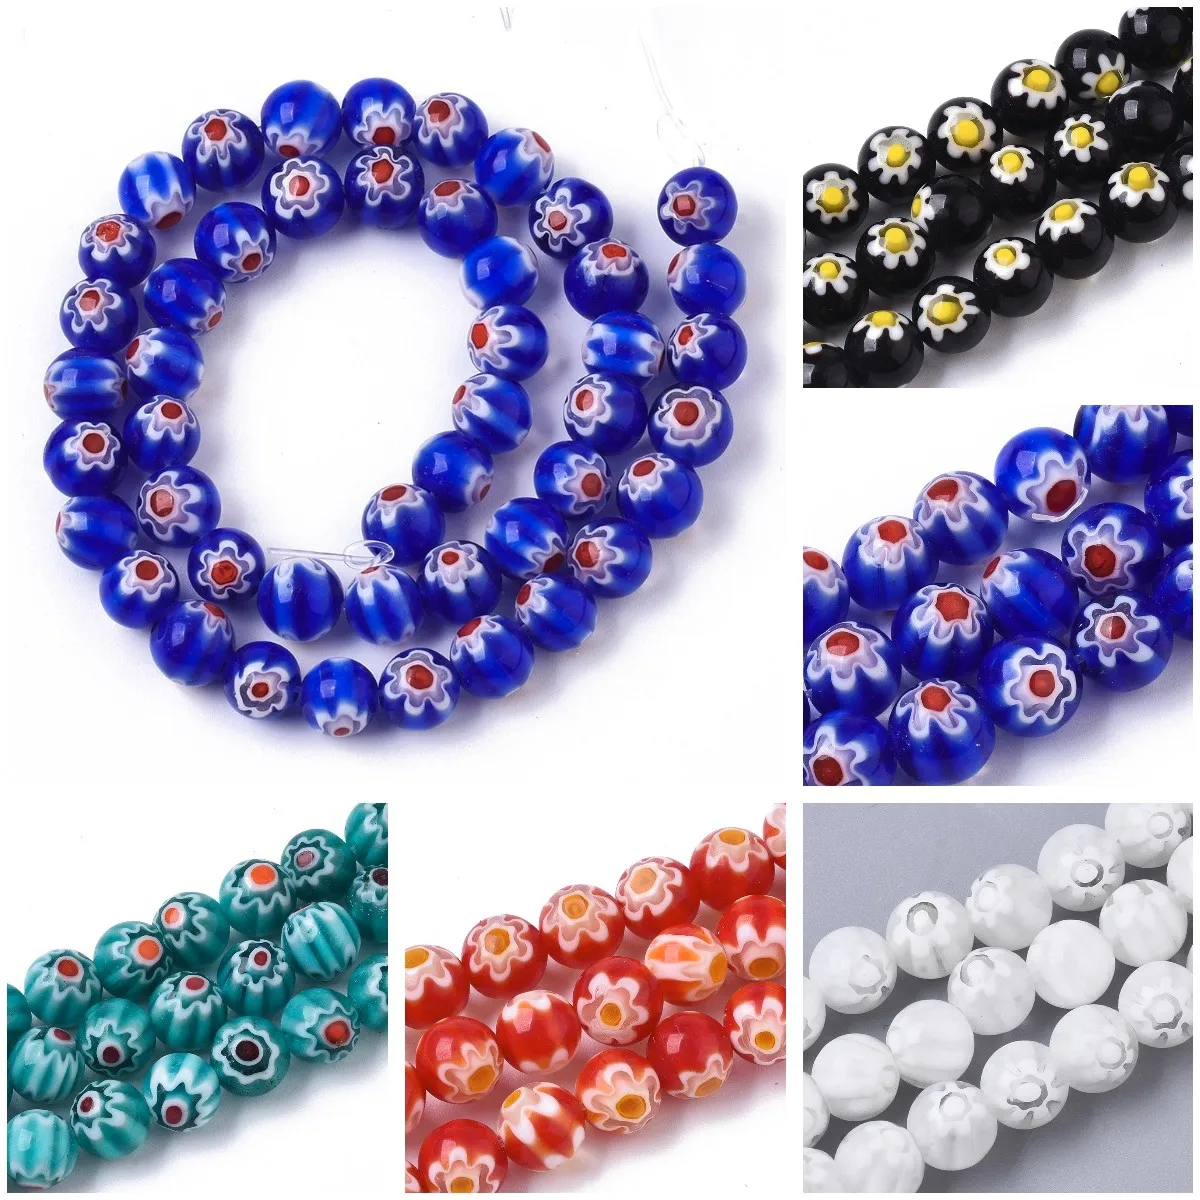 

48Pcs 8mm Flower Pattern Round Lampwork Glass Beads Trendy Loose Spacer Bead For Bracelet Necklace DIY Jewelry Making Findings